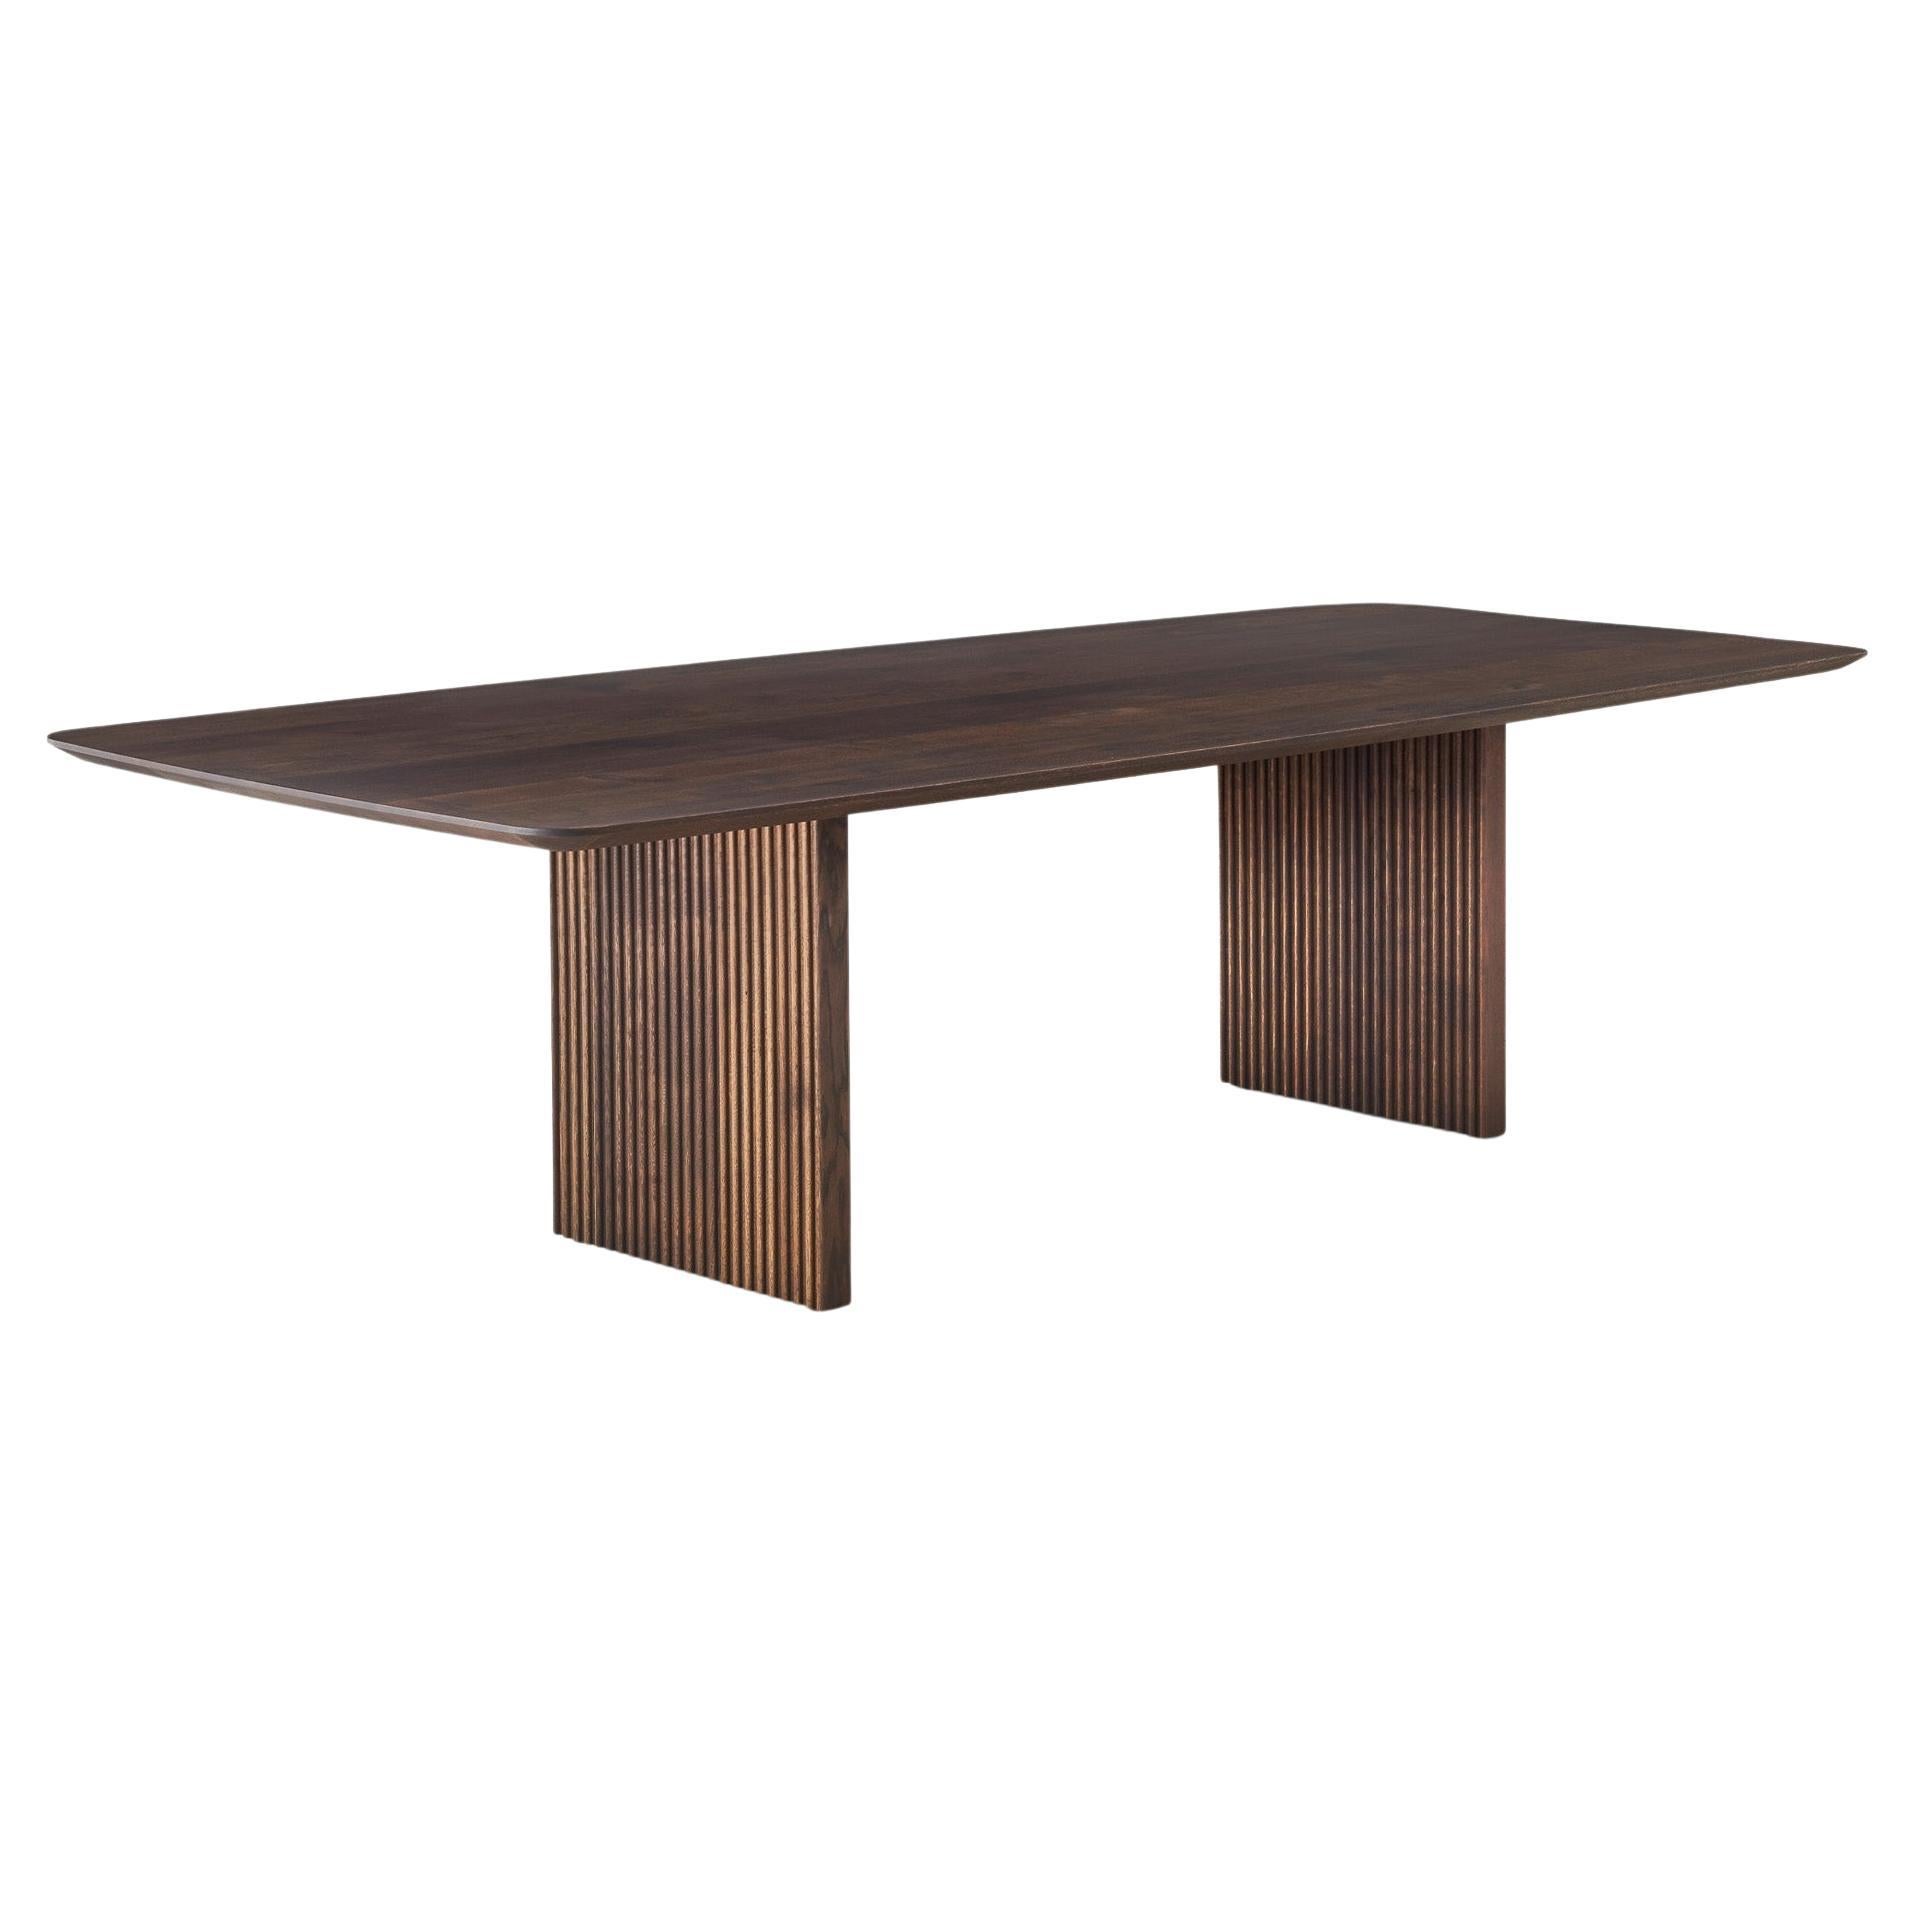 Customizable Dining Table TEN 240, Smoked Oak or Walnut For Sale